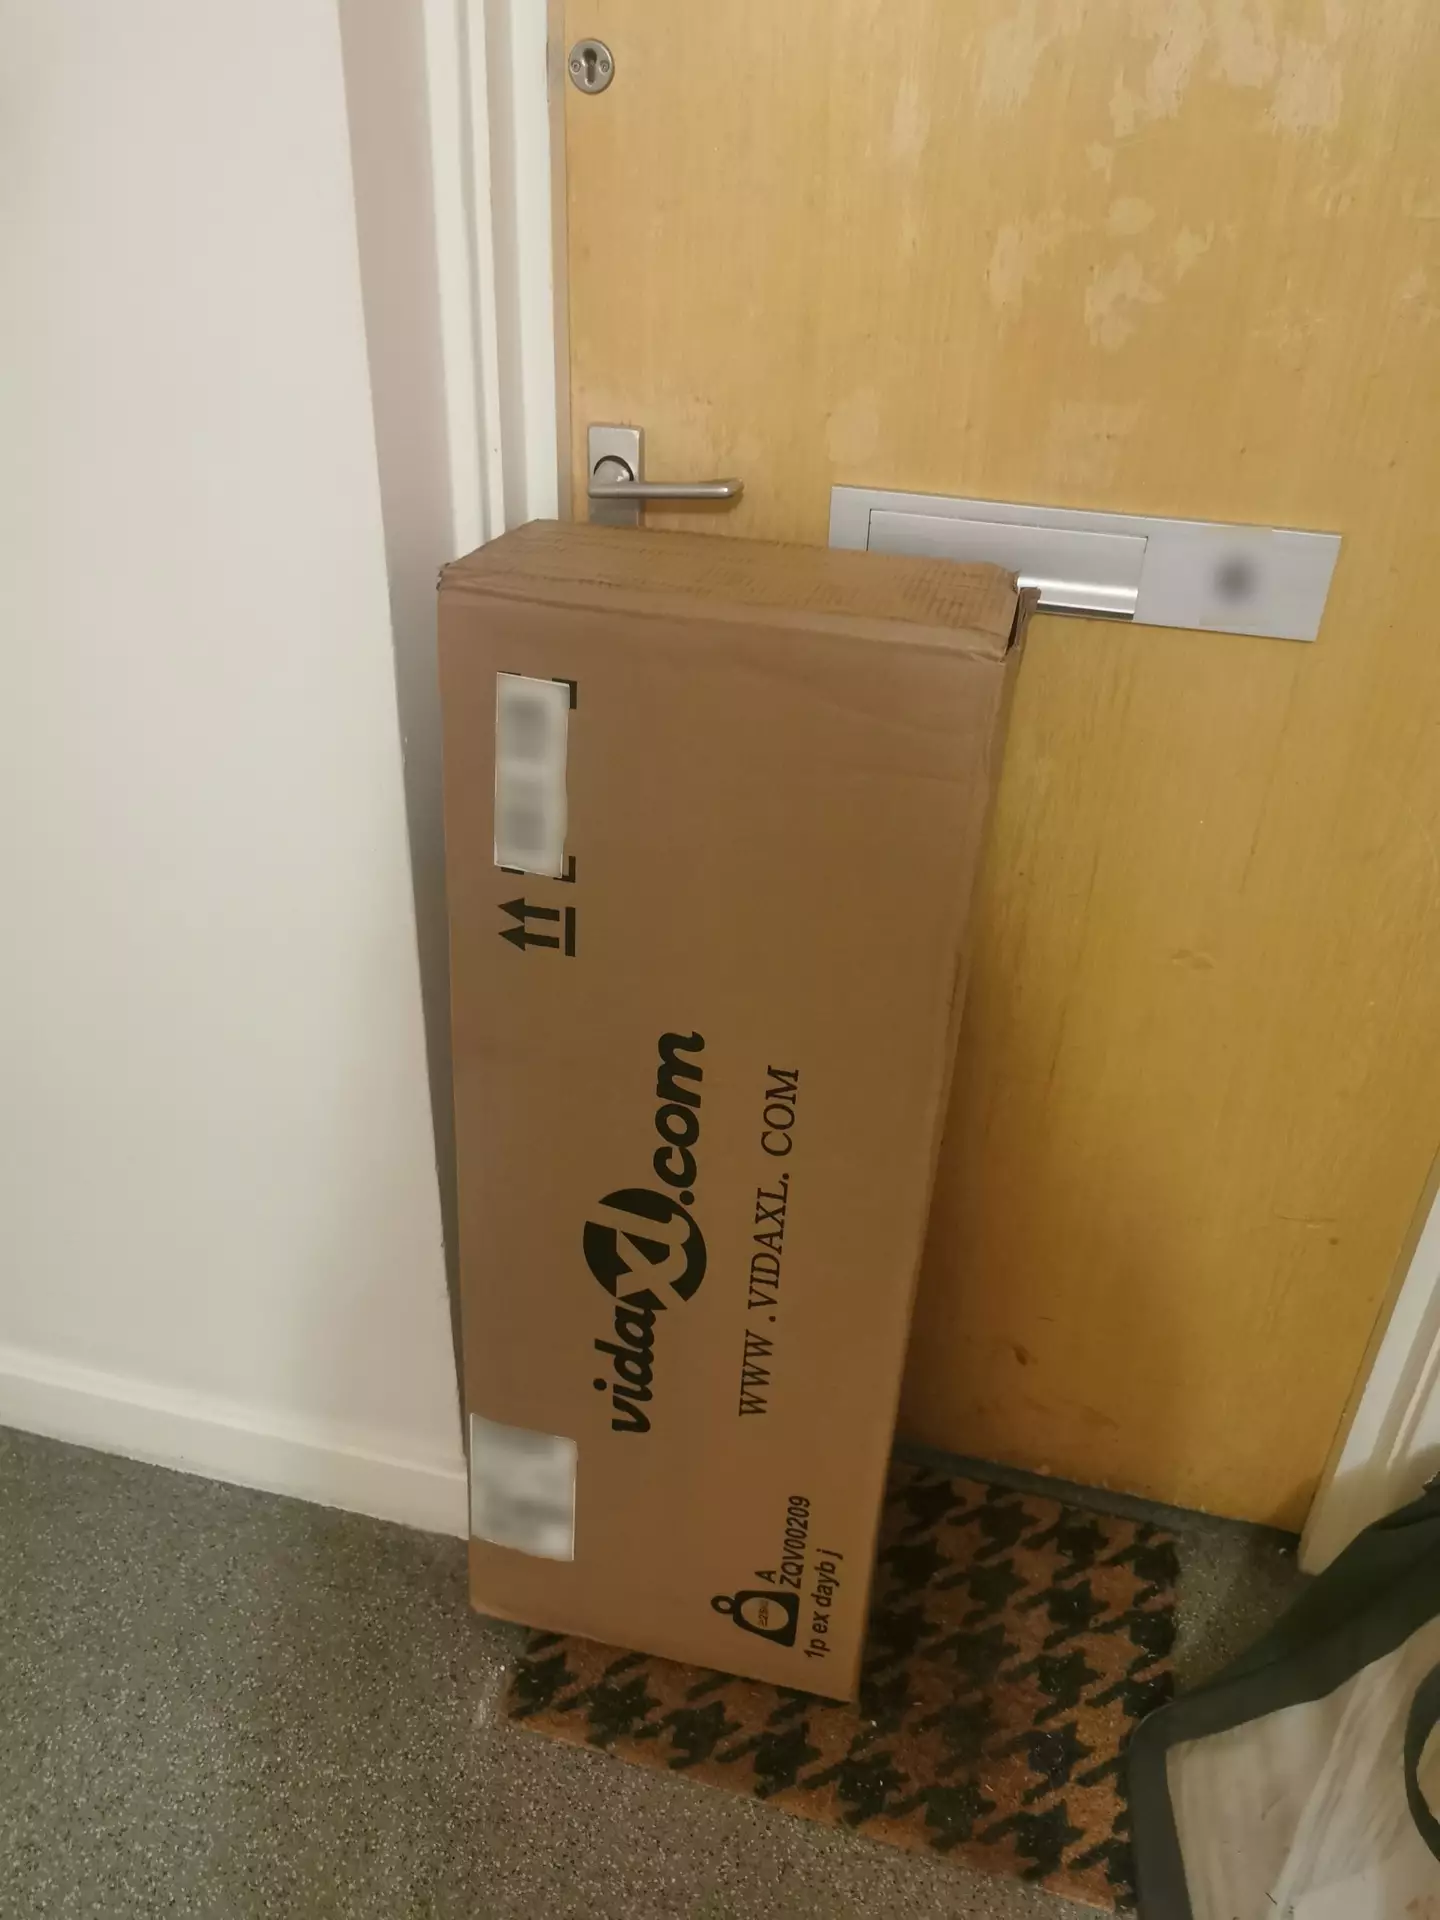 The parcel was placed under the door handle, trapping the pensioner inside.